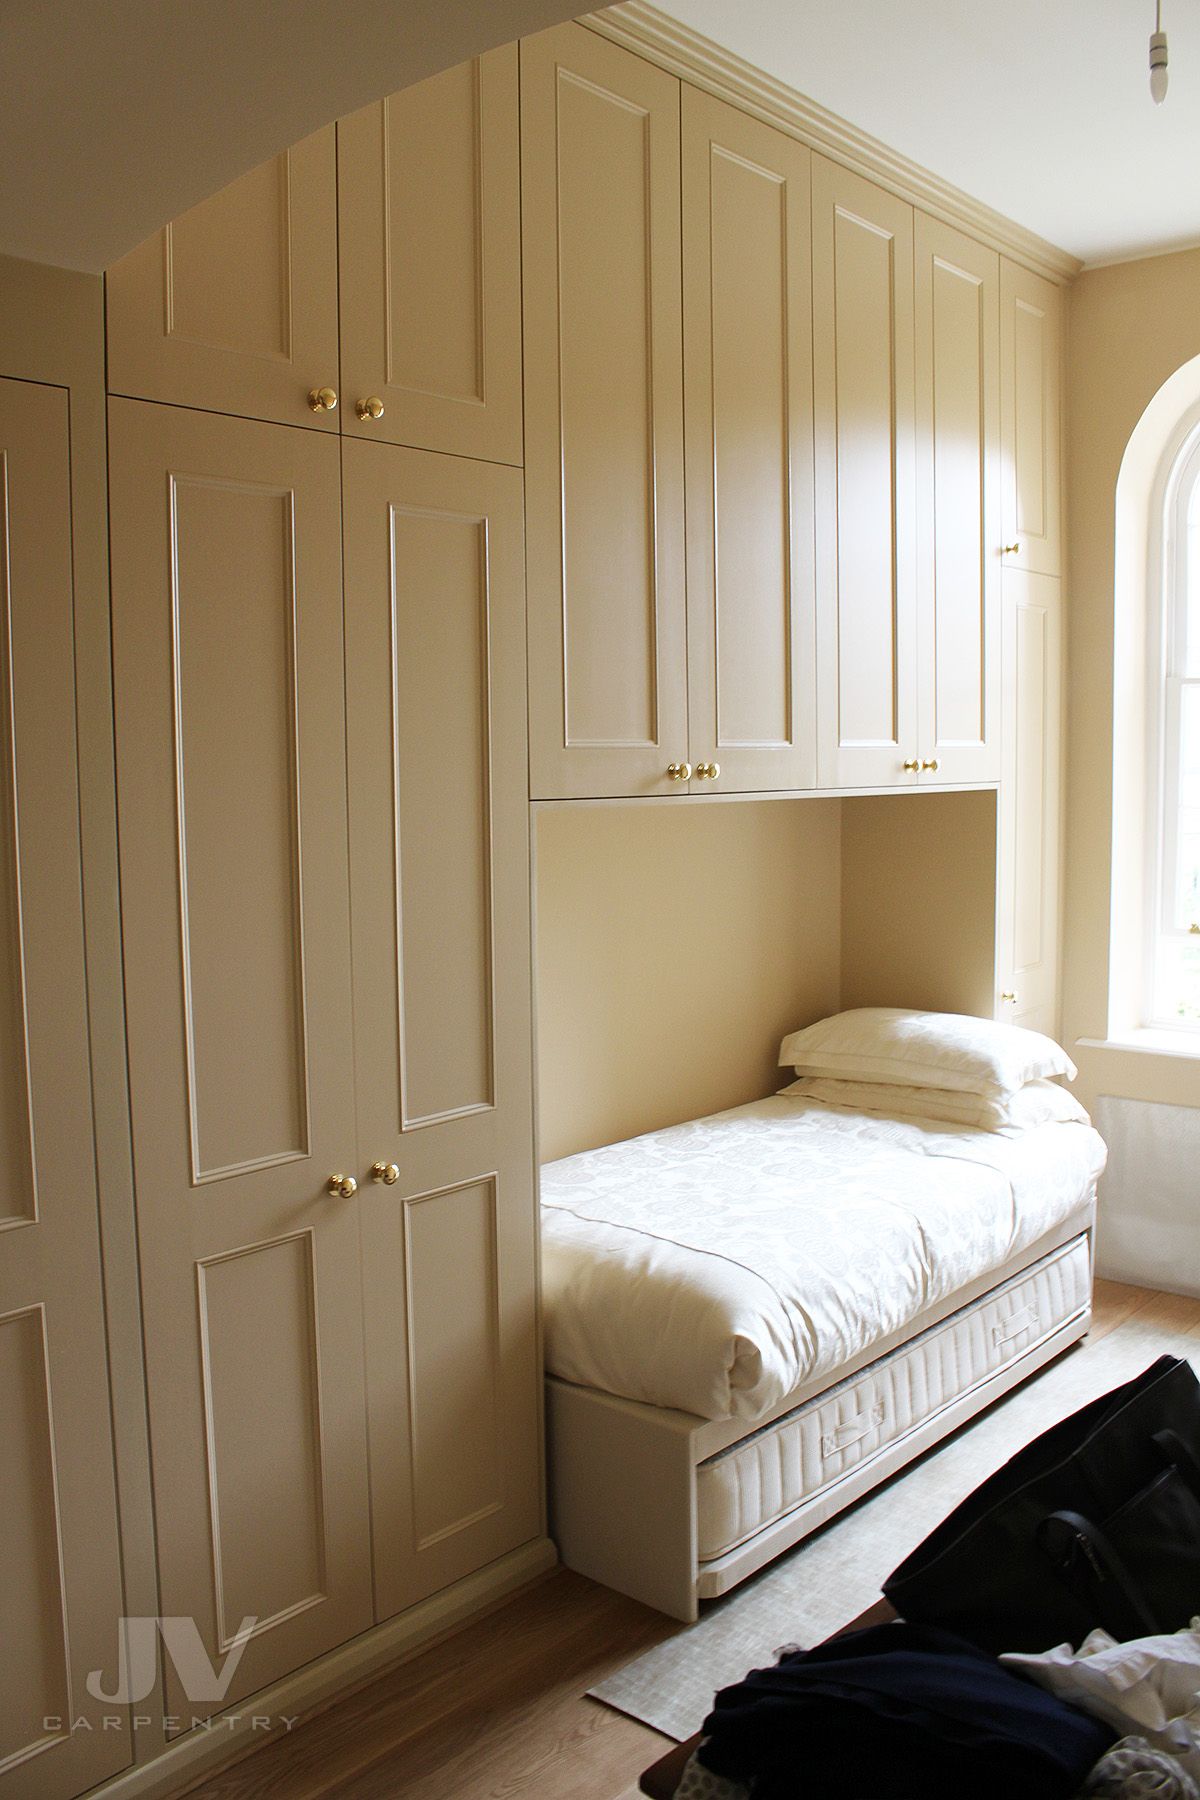 12 Fitted Wardrobes Over Bed Ideas For Your Bedroom | Jv Carpentry Regarding Wardrobes Beds (View 8 of 15)